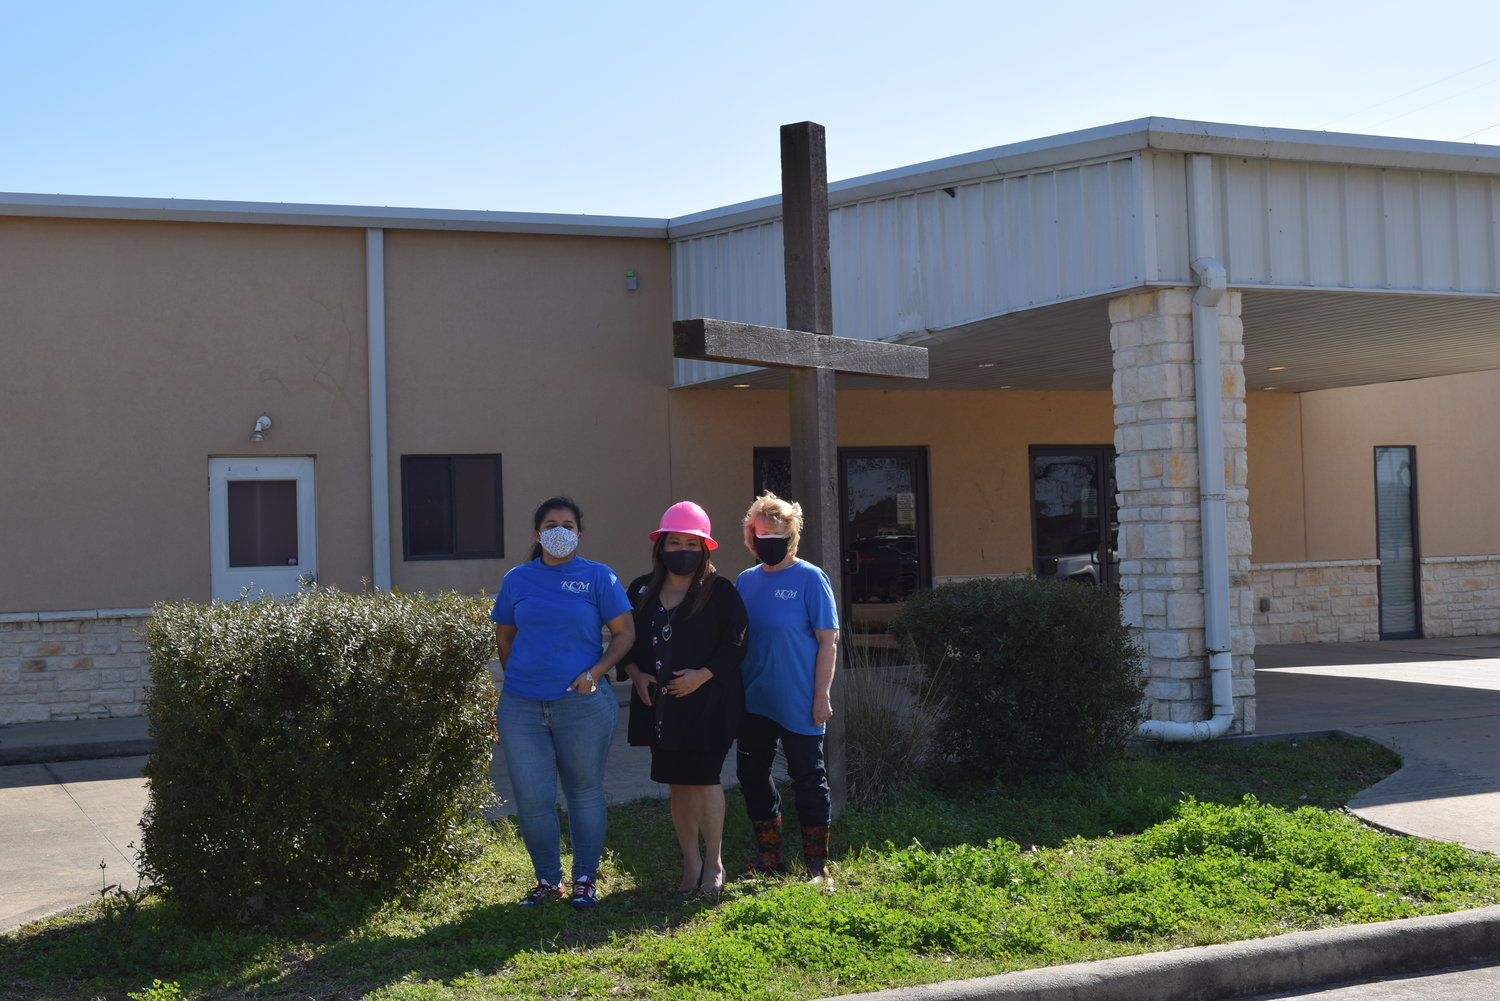 Katy Christian Ministries Executive Director Deysi Crespo (center in pink hardhat) poses with KCM Business Development Manager Jeannette Trejo (left) and KCM Master Gardener Karen Smith (right) in front of KCM’s new headquarters building at 3506 Porter Road in the Katy area. The new facility will allow the nonprofit to consolidate operations, enlarge its food pantry and enhance its community garden.